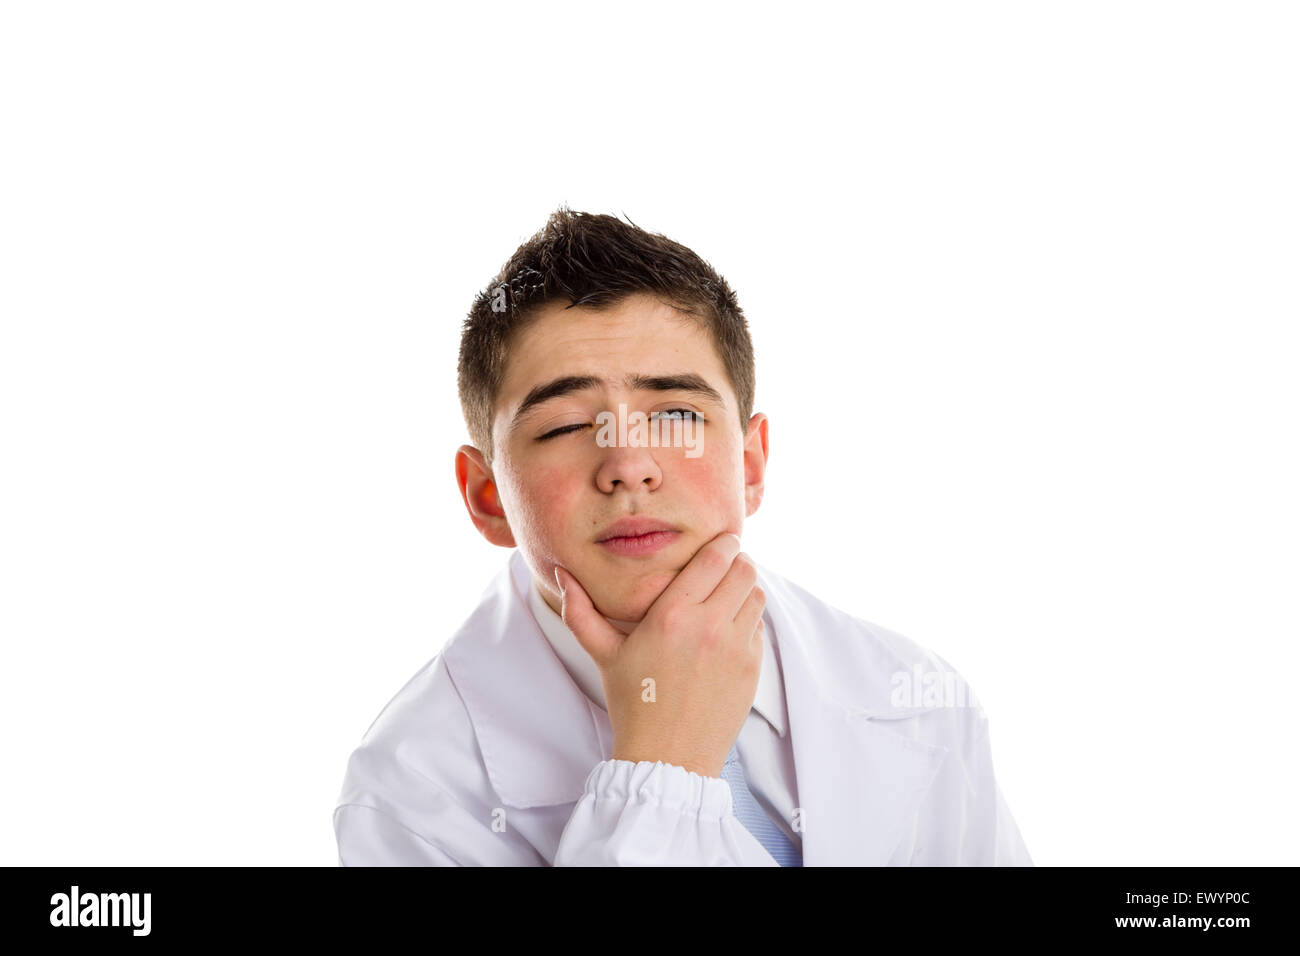 A boy doctor in blue tie and white coat holding his chin while thinking. His acne skin has not ben retouched Stock Photo